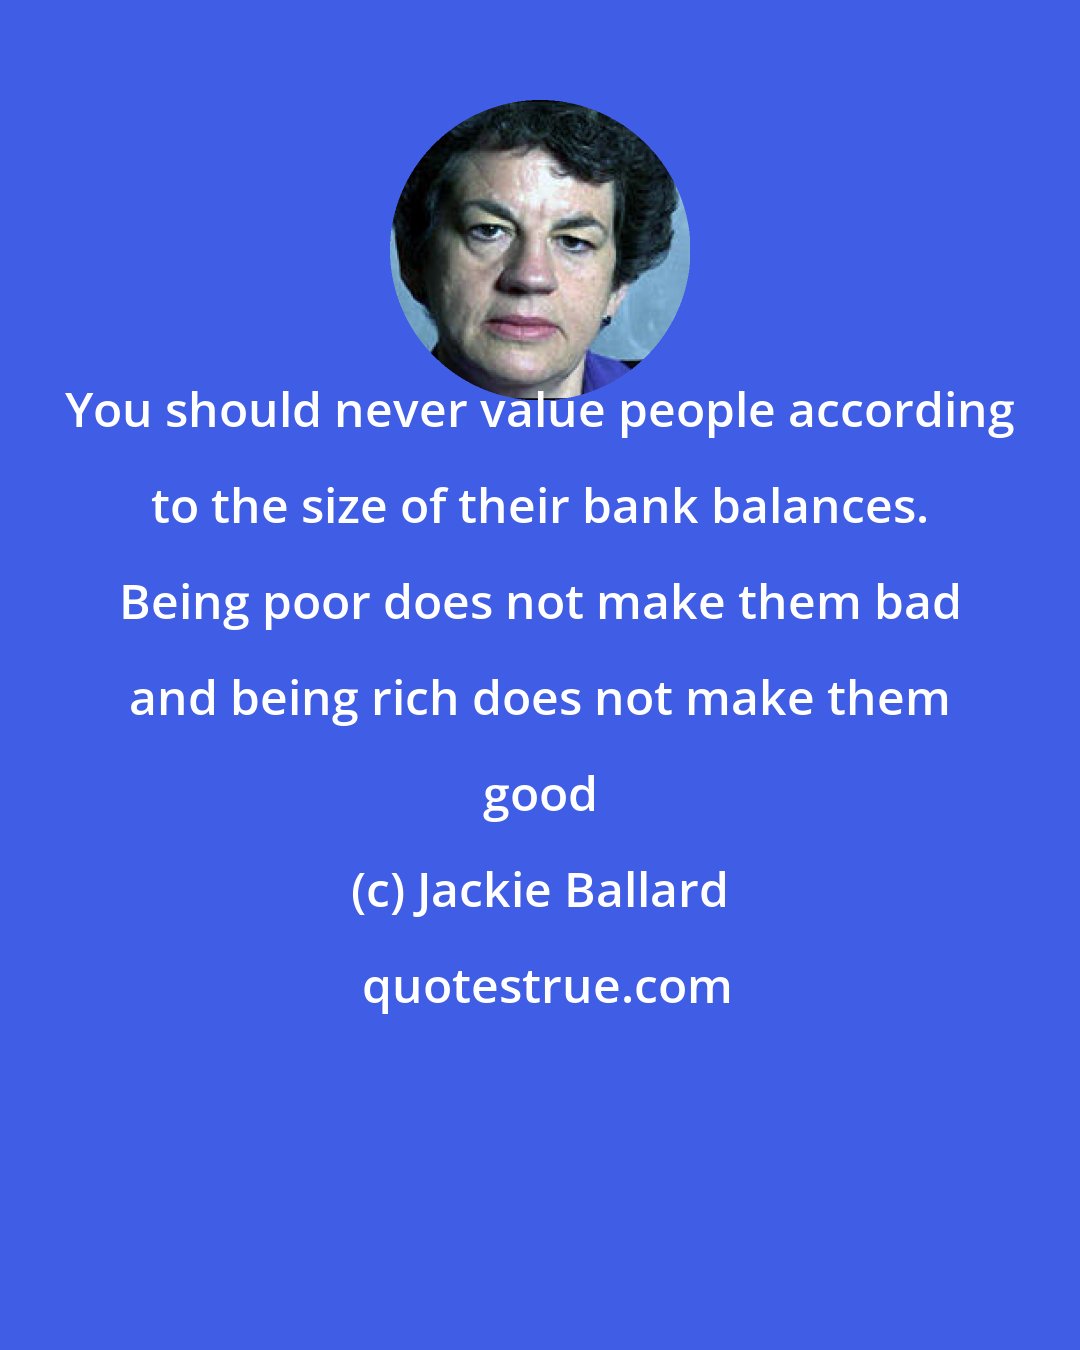 Jackie Ballard: You should never value people according to the size of their bank balances. Being poor does not make them bad and being rich does not make them good